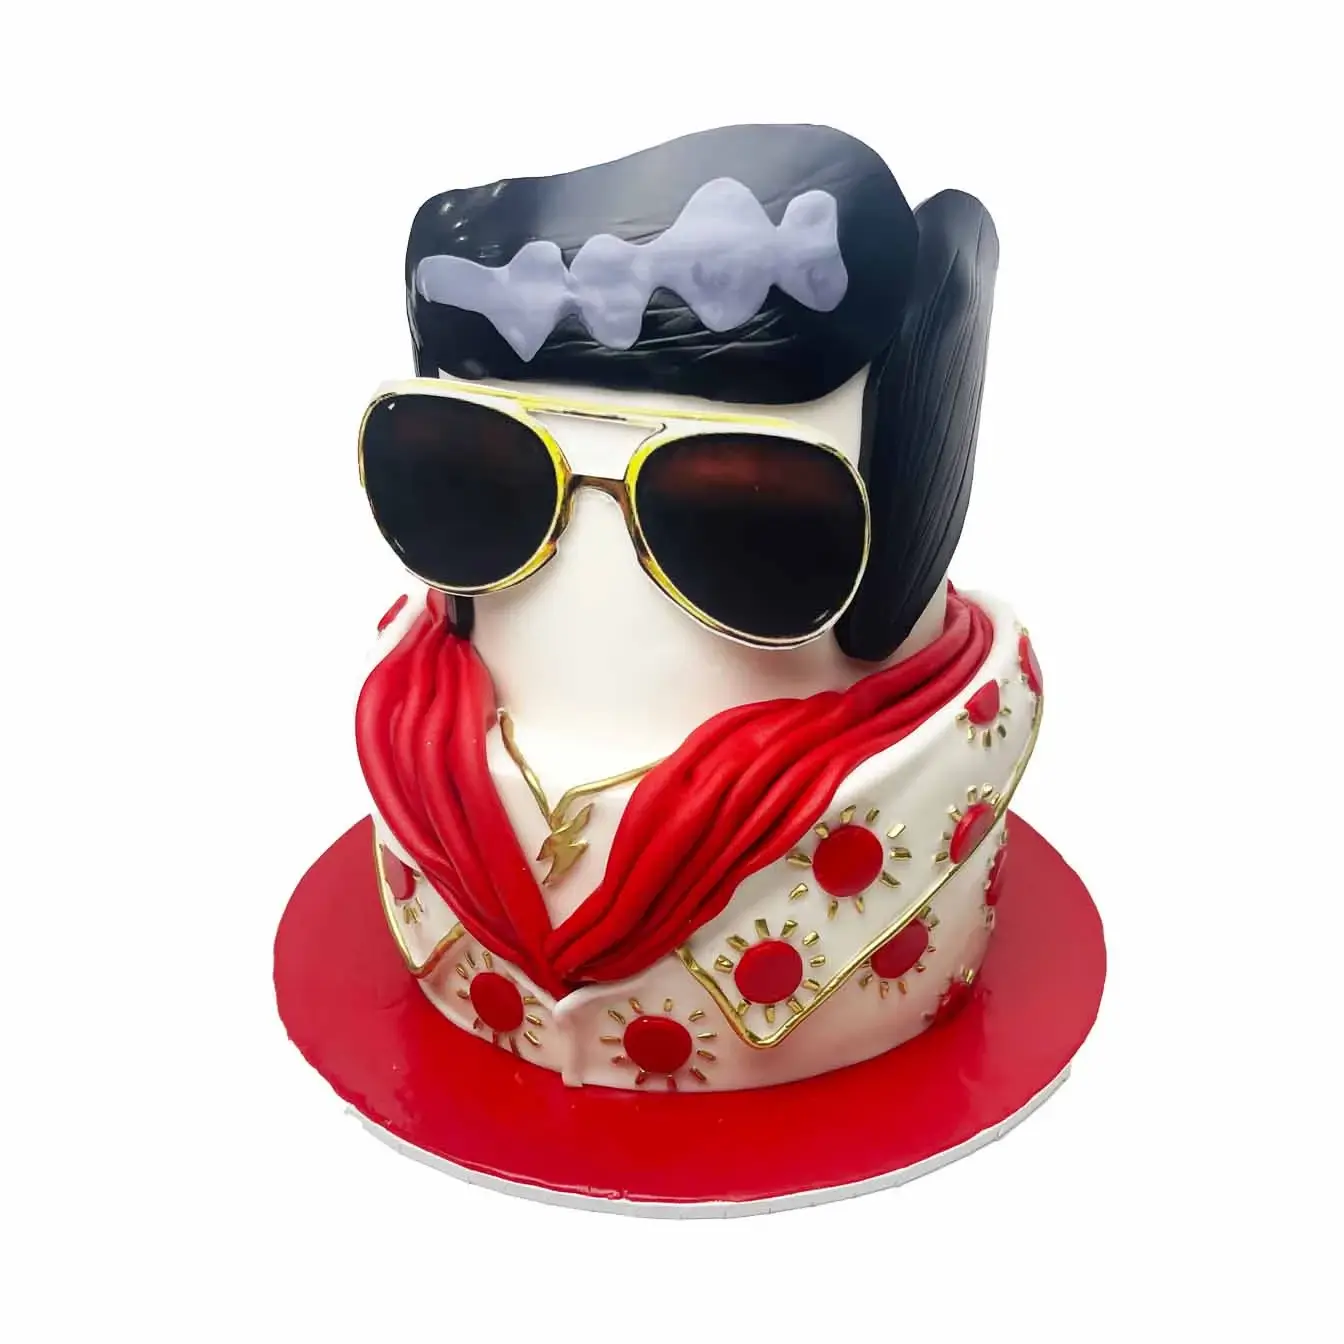 Elvis Tribute Extravaganza Cake - A 2-tier cake featuring Elvis's signature glasses, hairstyle, and a jumpsuit-adorned base tier, a show-stopping centerpiece for celebrations filled with the spirit of the King of Rock 'n' Roll.